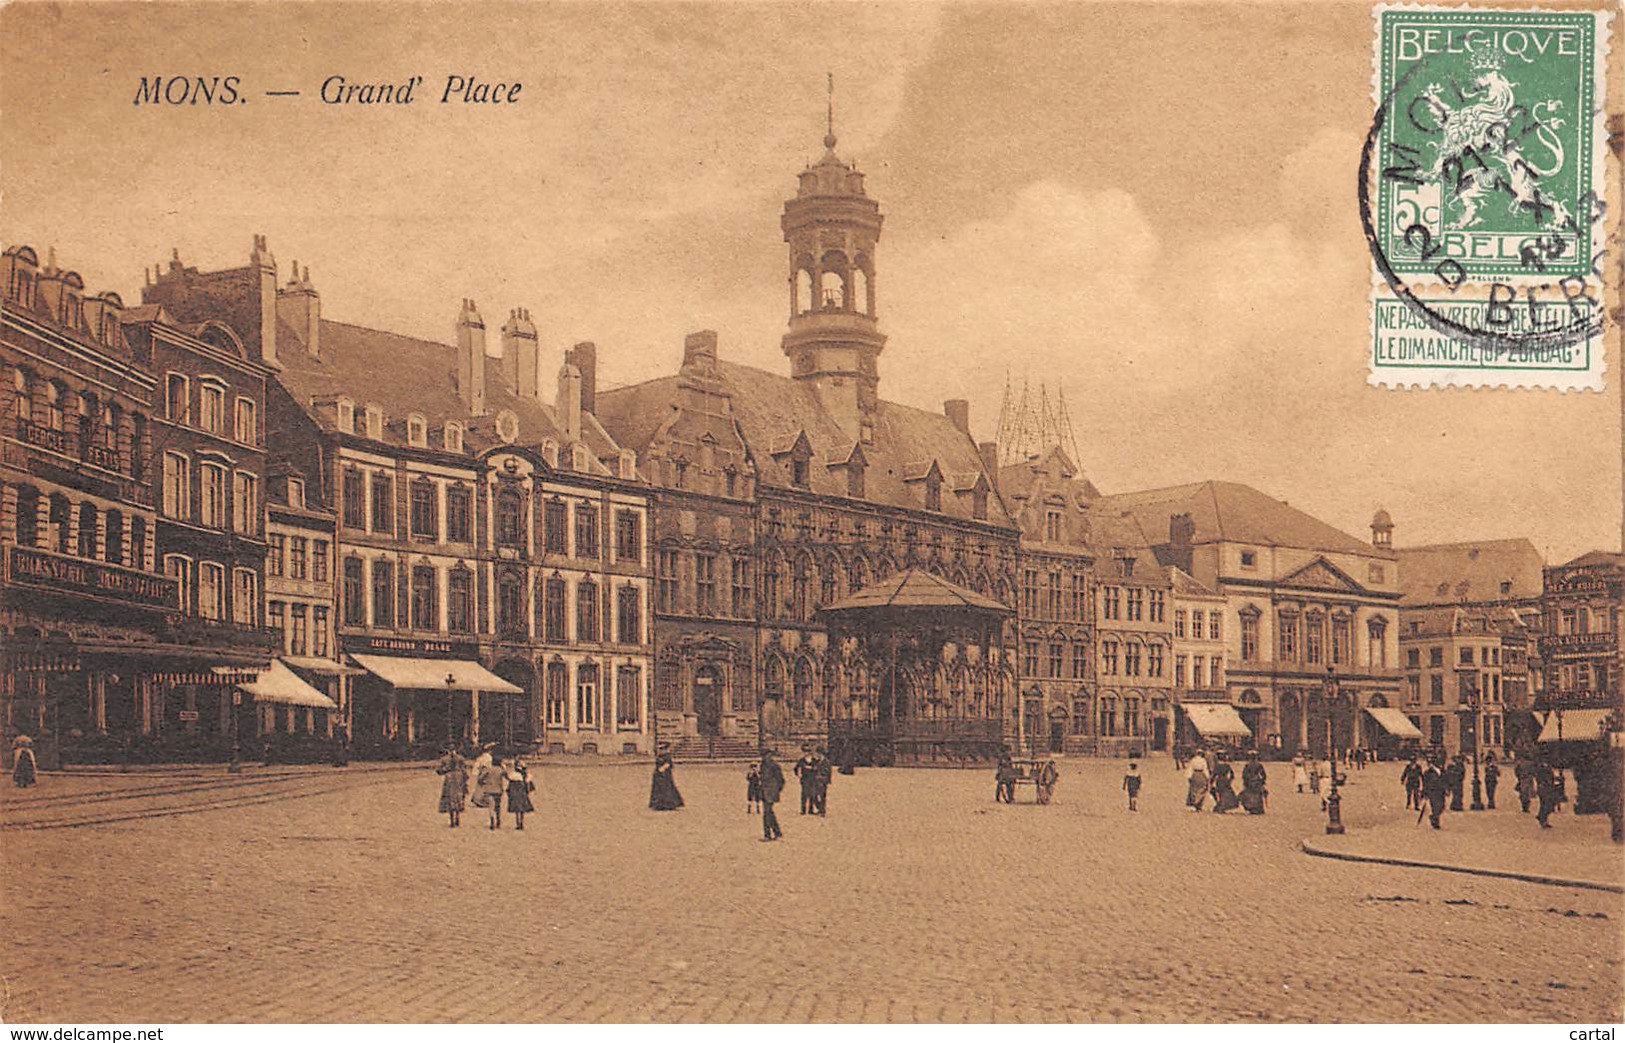 MONS - Grand'Place - Mons